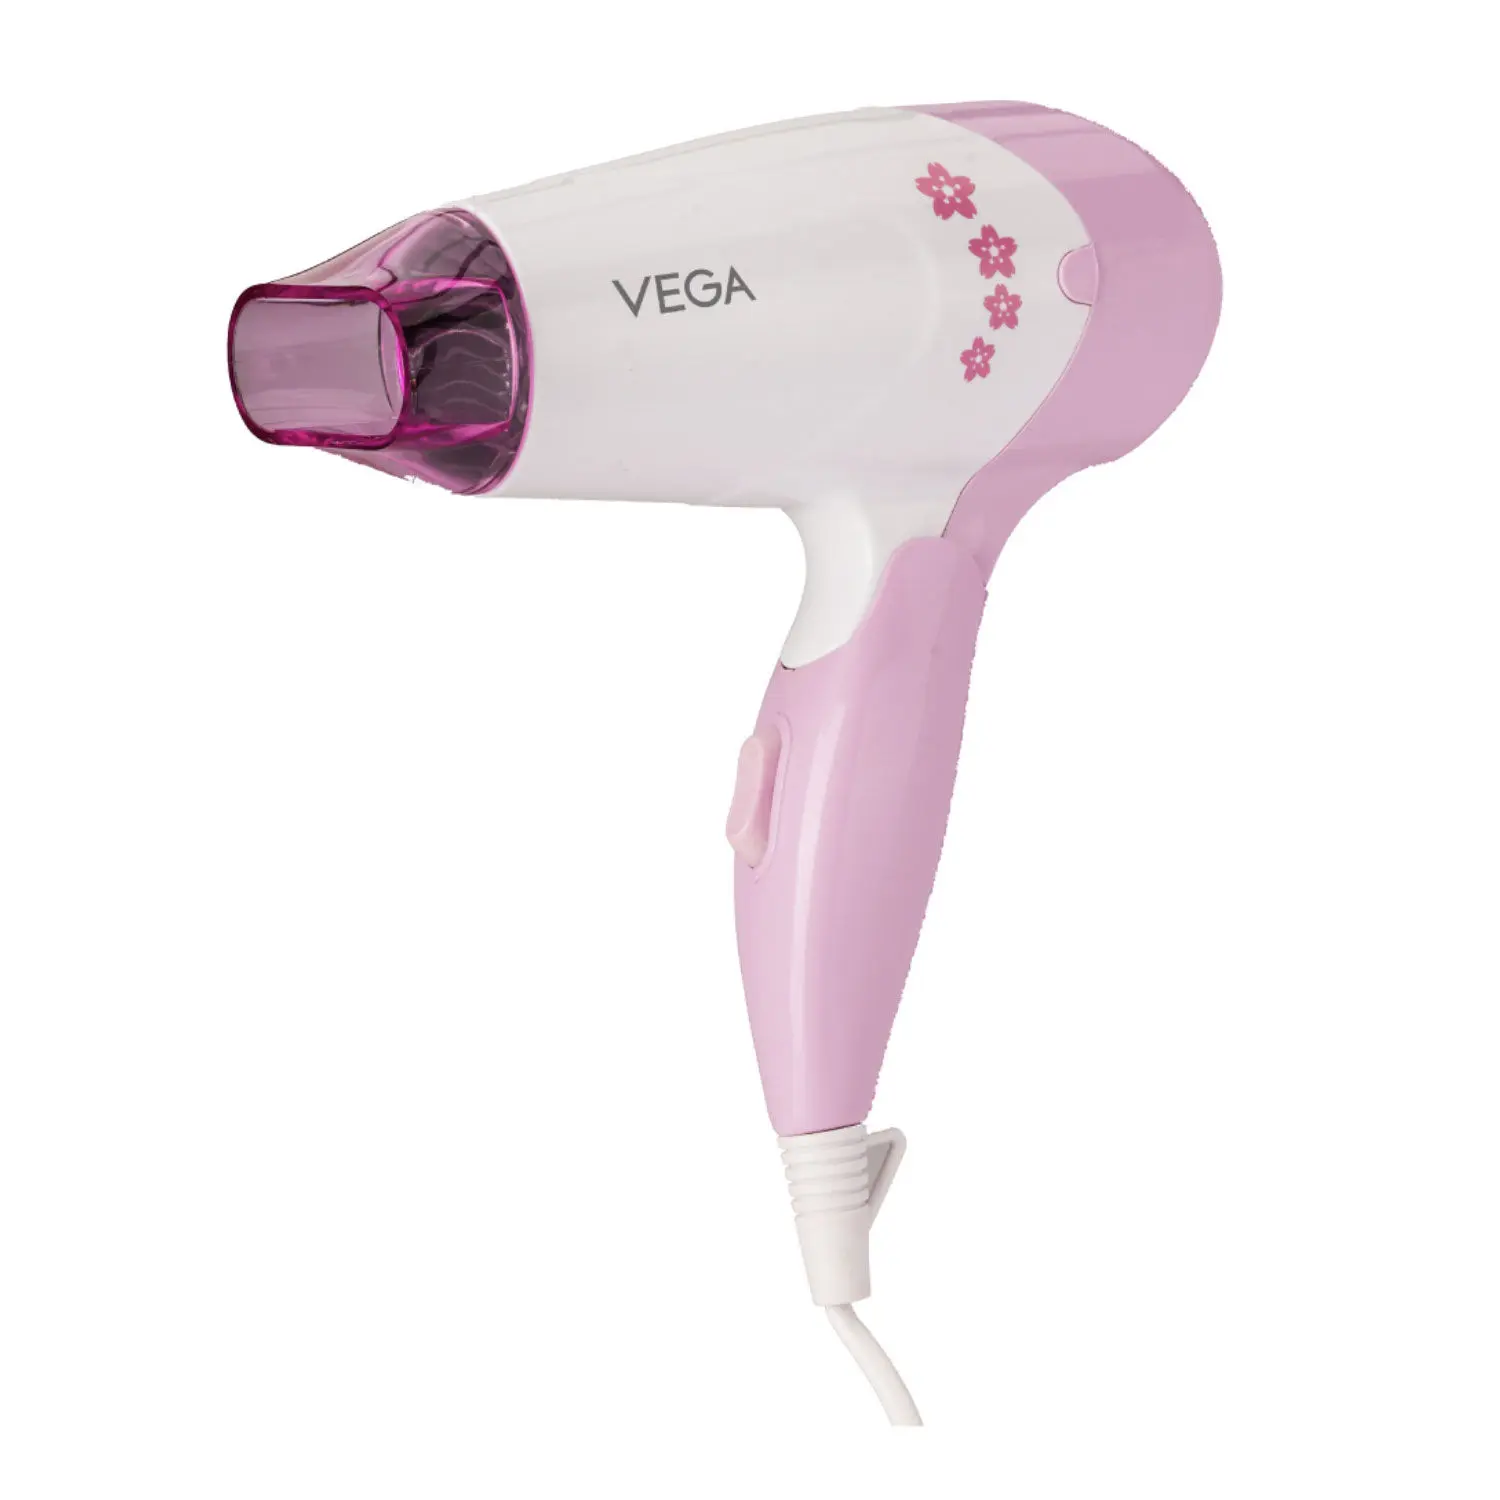 VEGA Insta Glam Foldable 1000 Watts Hair Dryer With 2 Heat & Speed Settings, VHDH-20,White - Pink (Made In India)